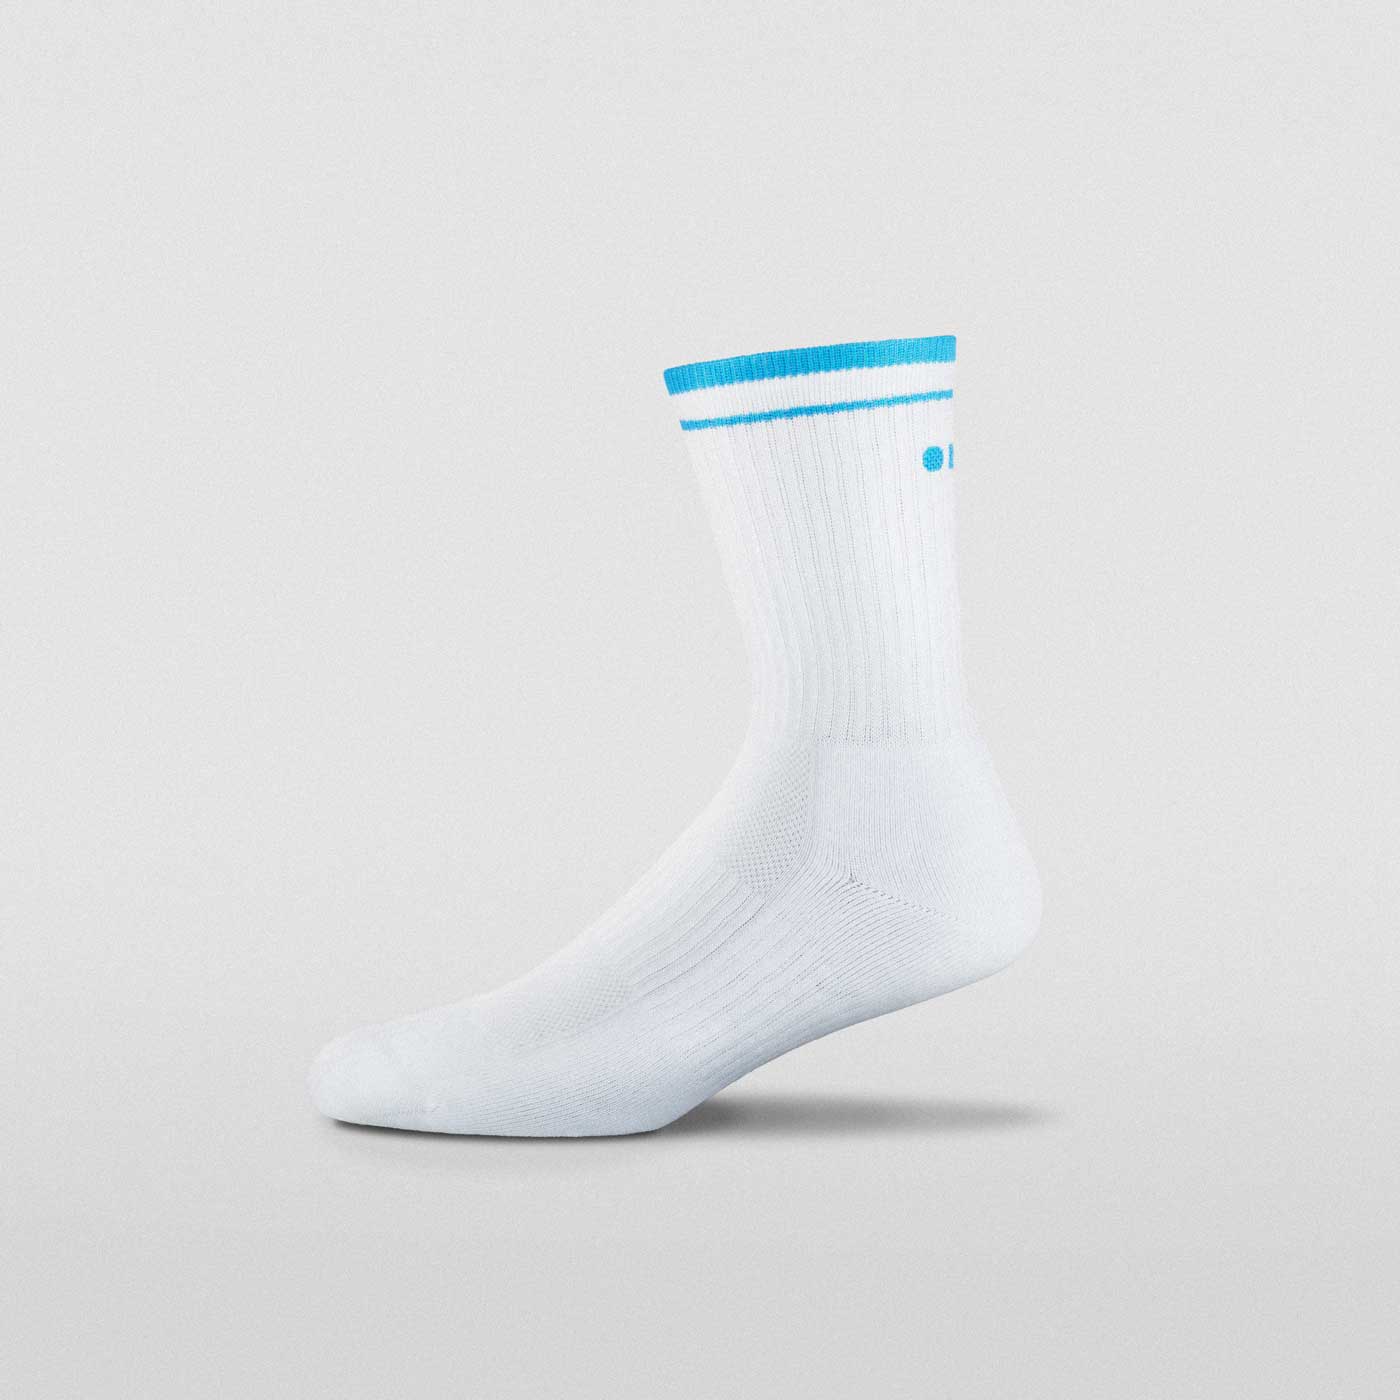 Men's white tennis socks made by Clay Active. Made in Australia.